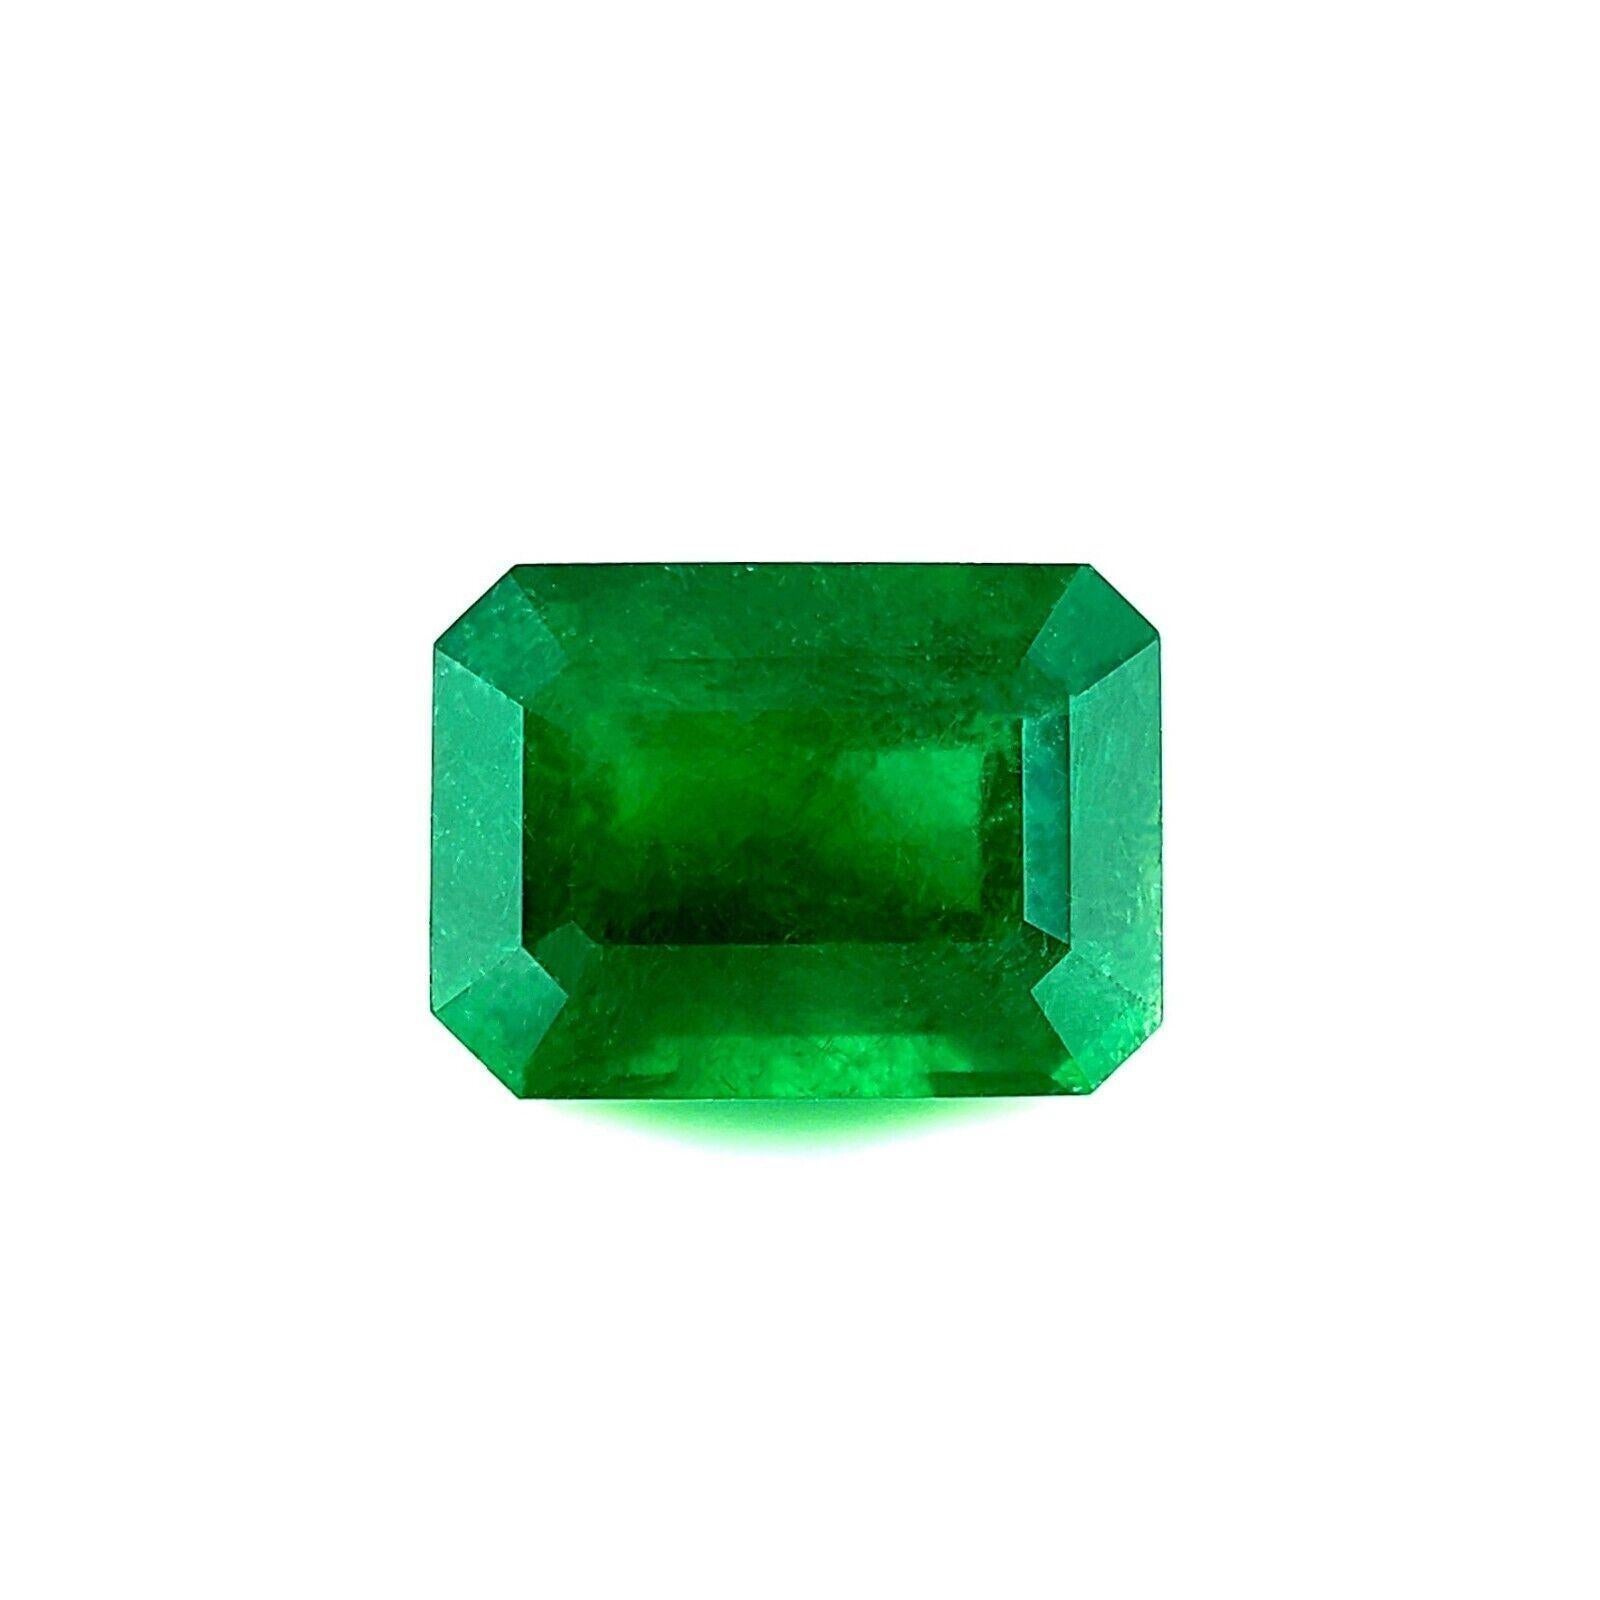 Natural Deep Green Emerald 1.77ct Octagon Emerald Cut 7.5x5.3mm Loose Gemstone

Natural Deep Green Emerald Gemstone.
1.77 Carat with a beautiful deep green colour and good clarity, some small natural inclusions as to be expected with emerald but no